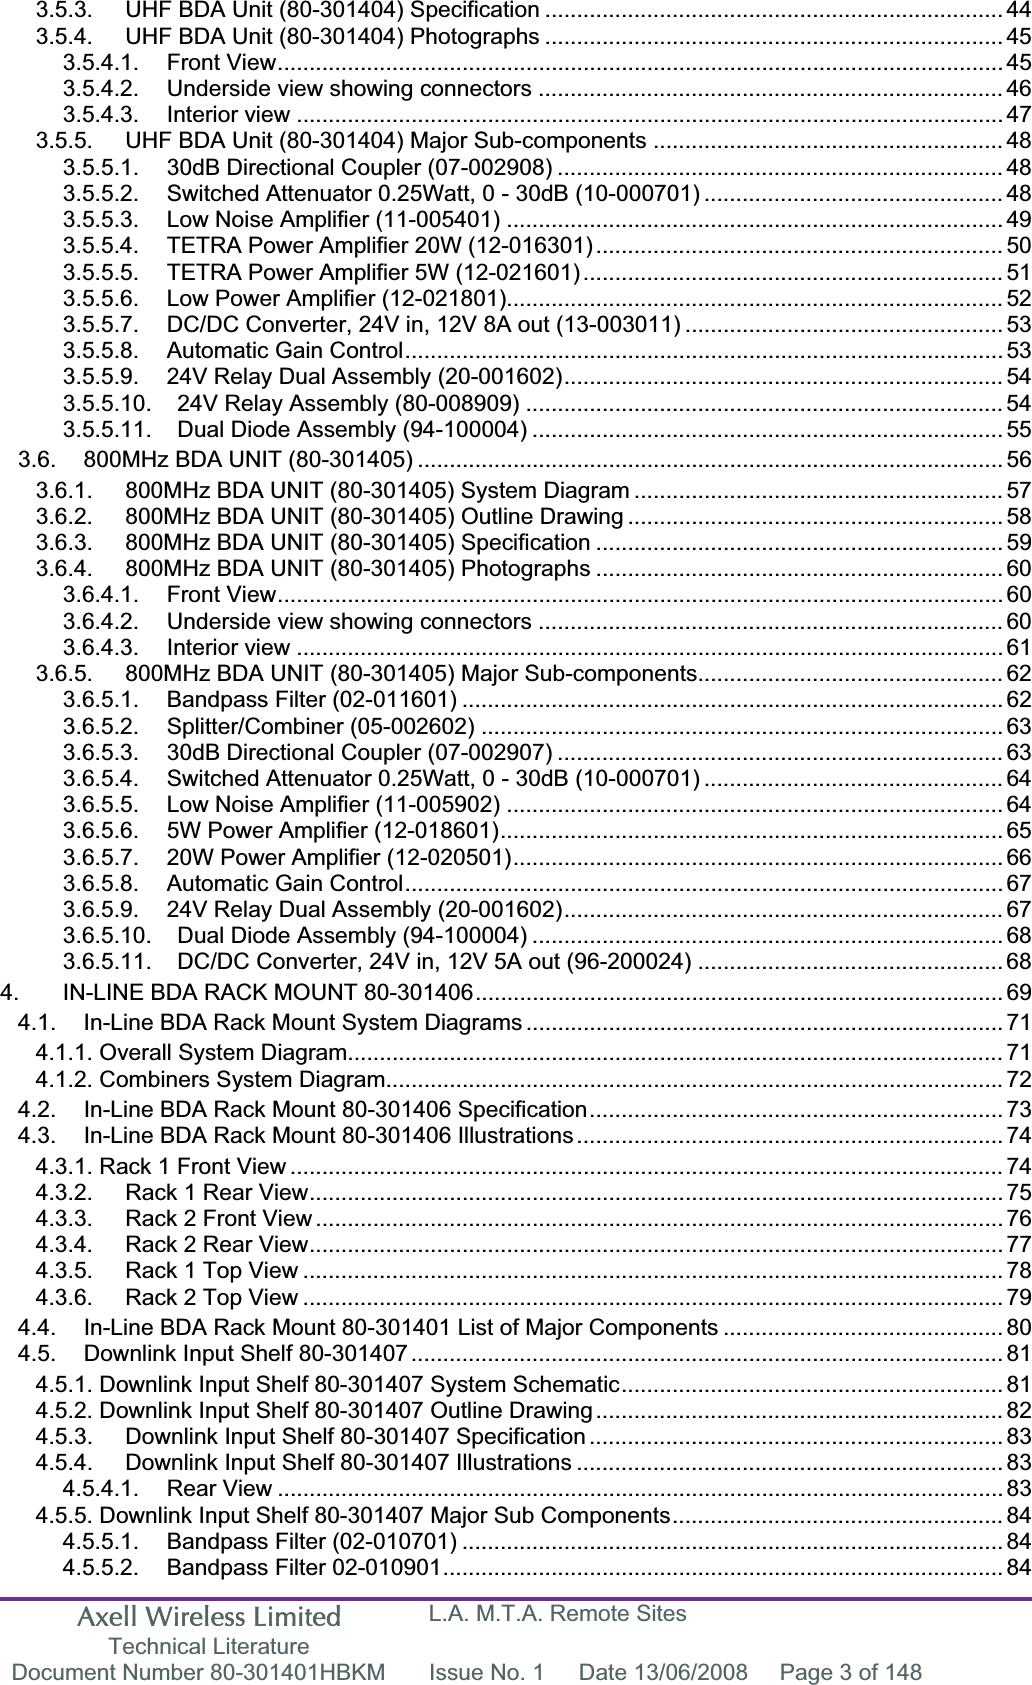 Axell Wireless Limited Technical Literature L.A. M.T.A. Remote Sites Document Number 80-301401HBKM  Issue No. 1  Date 13/06/2008  Page 3 of 148 3.5.3. UHF BDA Unit (80-301404) Specification ........................................................................ 443.5.4. UHF BDA Unit (80-301404) Photographs ........................................................................ 453.5.4.1. Front View.................................................................................................................. 453.5.4.2. Underside view showing connectors ......................................................................... 463.5.4.3. Interior view ............................................................................................................... 473.5.5. UHF BDA Unit (80-301404) Major Sub-components ....................................................... 483.5.5.1. 30dB Directional Coupler (07-002908) ...................................................................... 483.5.5.2. Switched Attenuator 0.25Watt, 0 - 30dB (10-000701) ............................................... 483.5.5.3. Low Noise Amplifier (11-005401) .............................................................................. 493.5.5.4. TETRA Power Amplifier 20W (12-016301) ................................................................ 503.5.5.5. TETRA Power Amplifier 5W (12-021601) .................................................................. 513.5.5.6. Low Power Amplifier (12-021801).............................................................................. 523.5.5.7. DC/DC Converter, 24V in, 12V 8A out (13-003011) .................................................. 533.5.5.8. Automatic Gain Control.............................................................................................. 533.5.5.9. 24V Relay Dual Assembly (20-001602)..................................................................... 543.5.5.10. 24V Relay Assembly (80-008909) ........................................................................... 543.5.5.11. Dual Diode Assembly (94-100004) .......................................................................... 553.6. 800MHz BDA UNIT (80-301405) ............................................................................................ 563.6.1. 800MHz BDA UNIT (80-301405) System Diagram .......................................................... 573.6.2. 800MHz BDA UNIT (80-301405) Outline Drawing ........................................................... 583.6.3. 800MHz BDA UNIT (80-301405) Specification ................................................................ 593.6.4. 800MHz BDA UNIT (80-301405) Photographs ................................................................ 603.6.4.1. Front View.................................................................................................................. 603.6.4.2. Underside view showing connectors ......................................................................... 603.6.4.3. Interior view ............................................................................................................... 613.6.5. 800MHz BDA UNIT (80-301405) Major Sub-components................................................ 623.6.5.1. Bandpass Filter (02-011601) ..................................................................................... 623.6.5.2. Splitter/Combiner (05-002602) .................................................................................. 633.6.5.3. 30dB Directional Coupler (07-002907) ...................................................................... 633.6.5.4. Switched Attenuator 0.25Watt, 0 - 30dB (10-000701) ............................................... 643.6.5.5. Low Noise Amplifier (11-005902) .............................................................................. 643.6.5.6. 5W Power Amplifier (12-018601)............................................................................... 653.6.5.7. 20W Power Amplifier (12-020501)............................................................................. 663.6.5.8. Automatic Gain Control.............................................................................................. 673.6.5.9. 24V Relay Dual Assembly (20-001602)..................................................................... 673.6.5.10. Dual Diode Assembly (94-100004) .......................................................................... 683.6.5.11. DC/DC Converter, 24V in, 12V 5A out (96-200024) ................................................ 684. IN-LINE BDA RACK MOUNT 80-301406................................................................................... 694.1. In-Line BDA Rack Mount System Diagrams ........................................................................... 714.1.1. Overall System Diagram....................................................................................................... 714.1.2. Combiners System Diagram.................................................................................................724.2. In-Line BDA Rack Mount 80-301406 Specification................................................................. 734.3. In-Line BDA Rack Mount 80-301406 Illustrations................................................................... 744.3.1. Rack 1 Front View ................................................................................................................ 744.3.2. Rack 1 Rear View............................................................................................................. 754.3.3. Rack 2 Front View ............................................................................................................ 764.3.4. Rack 2 Rear View............................................................................................................. 774.3.5. Rack 1 Top View .............................................................................................................. 784.3.6. Rack 2 Top View .............................................................................................................. 794.4. In-Line BDA Rack Mount 80-301401 List of Major Components ............................................ 804.5. Downlink Input Shelf 80-301407............................................................................................. 814.5.1. Downlink Input Shelf 80-301407 System Schematic............................................................ 814.5.2. Downlink Input Shelf 80-301407 Outline Drawing................................................................ 824.5.3. Downlink Input Shelf 80-301407 Specification ................................................................. 834.5.4. Downlink Input Shelf 80-301407 Illustrations ................................................................... 834.5.4.1. Rear View .................................................................................................................. 834.5.5. Downlink Input Shelf 80-301407 Major Sub Components.................................................... 844.5.5.1. Bandpass Filter (02-010701) ..................................................................................... 844.5.5.2. Bandpass Filter 02-010901........................................................................................ 84